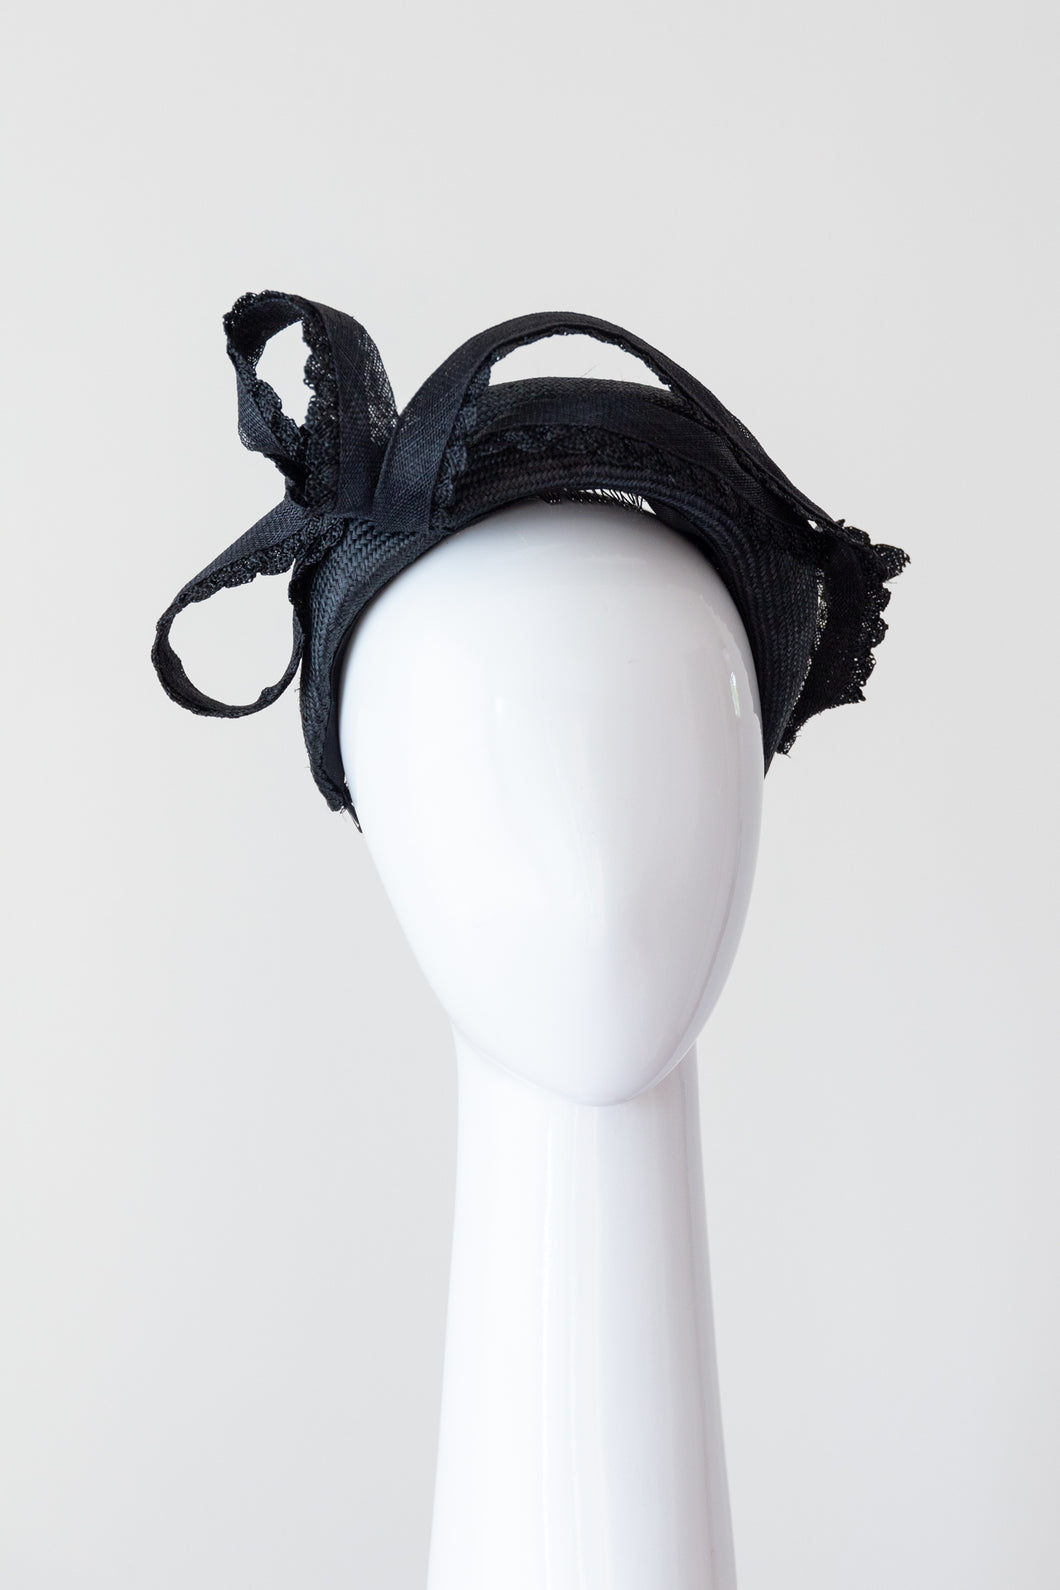 Black Halo Headband with Sweeping Side Bow